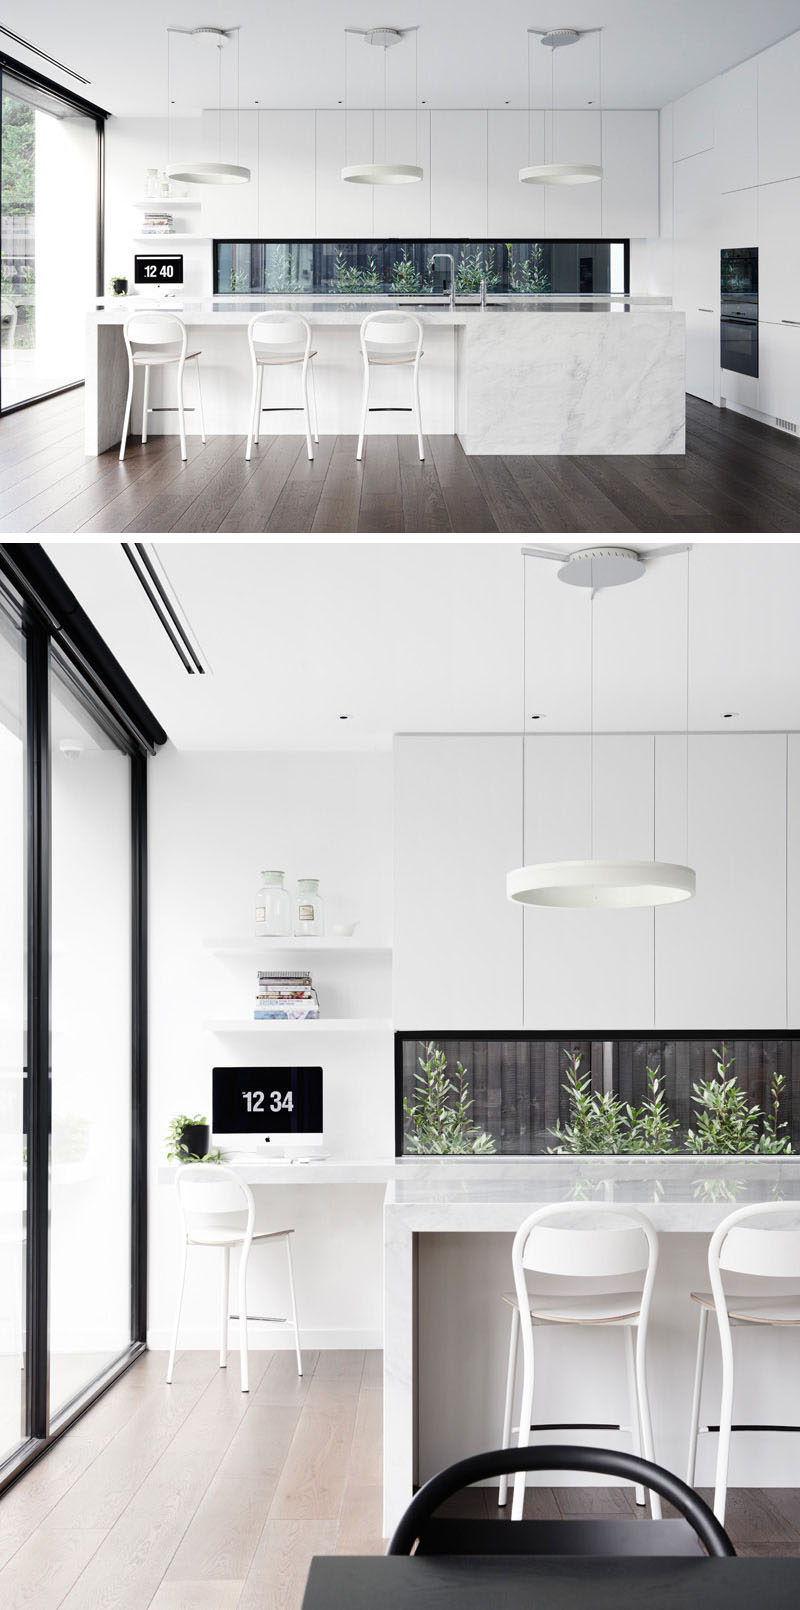 12 Inspirational Examples Of Letterbox Windows In Kitchens // The black frame of the letterbox window in this Melbourne home complements the other touches of black used throughout the kitchen and creates a brighter alternative to a backsplash.